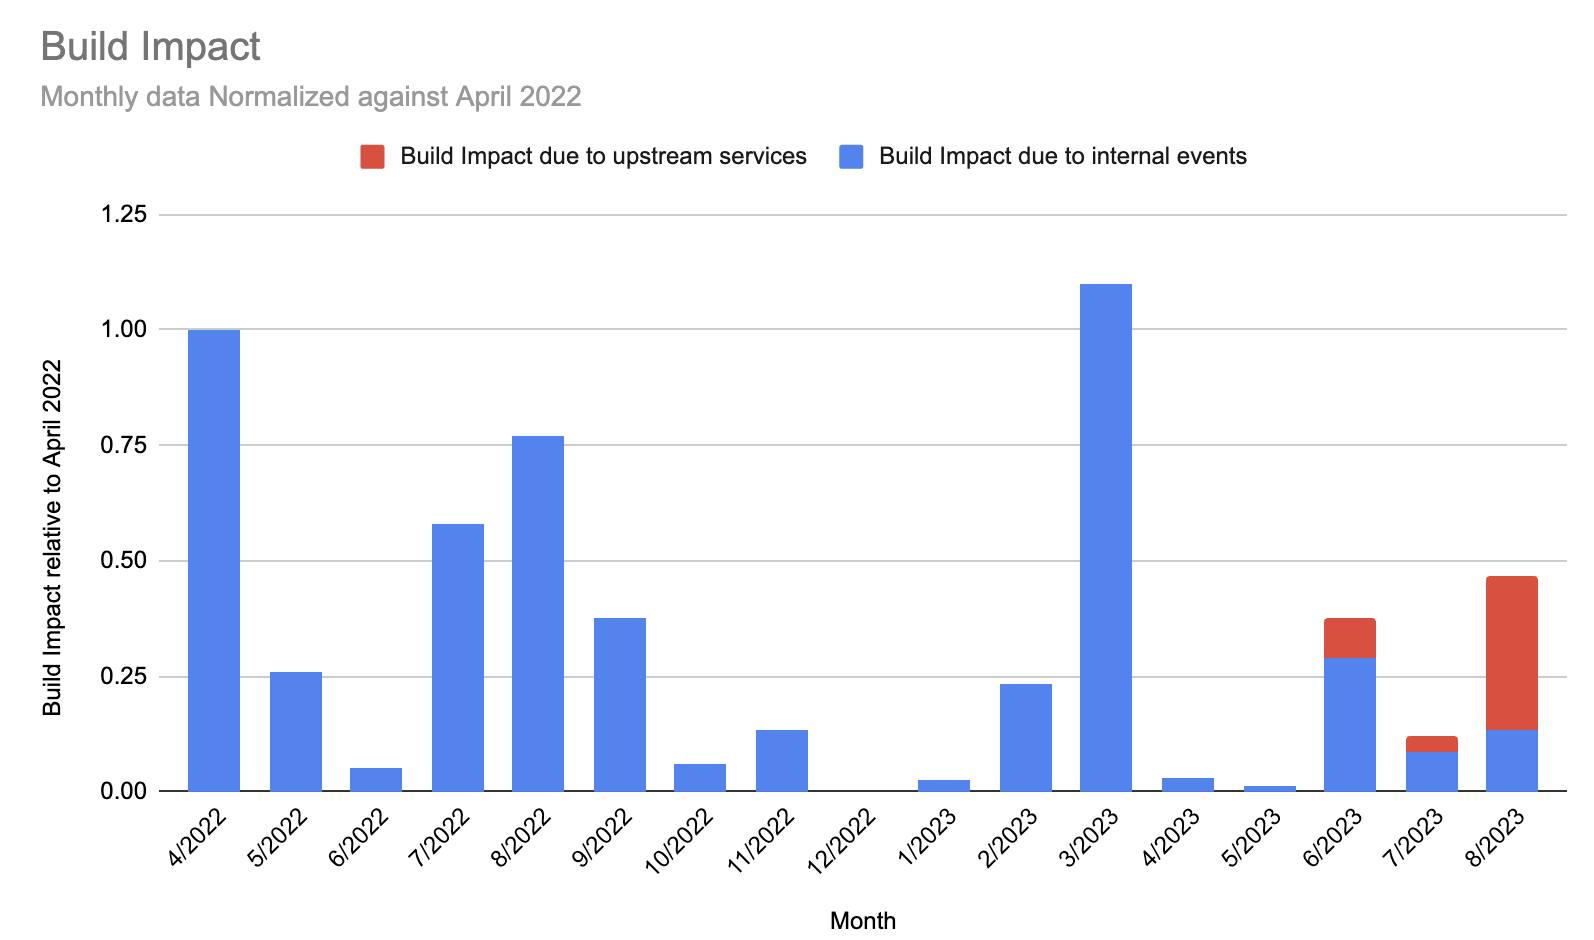 Stacked bar chart showing the comparative build impact of internal and upstream events since April 2022